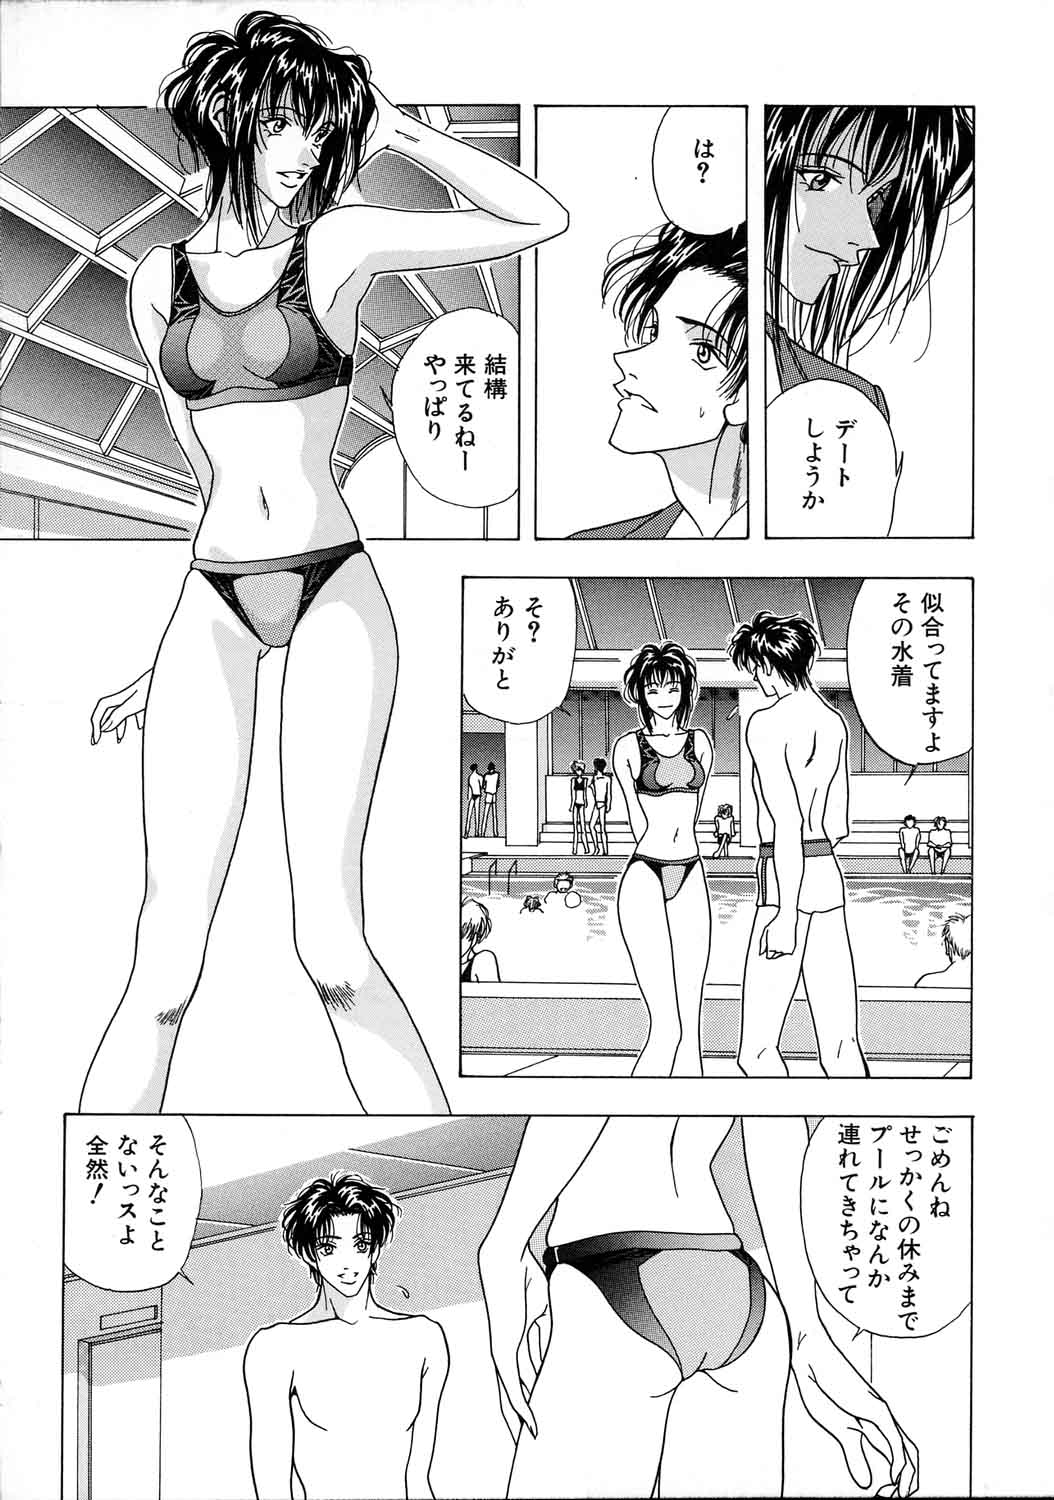 MANGA page 1998 Game of Gal ART BY [ A.O.I ] HITORI - HENTAI MASTER, in  ENRIQUE ALONSO's ❣️❣️ MANGA ART BY [A.O.I] HITORI- HENTAI MASTER Comic Art  Gallery Room